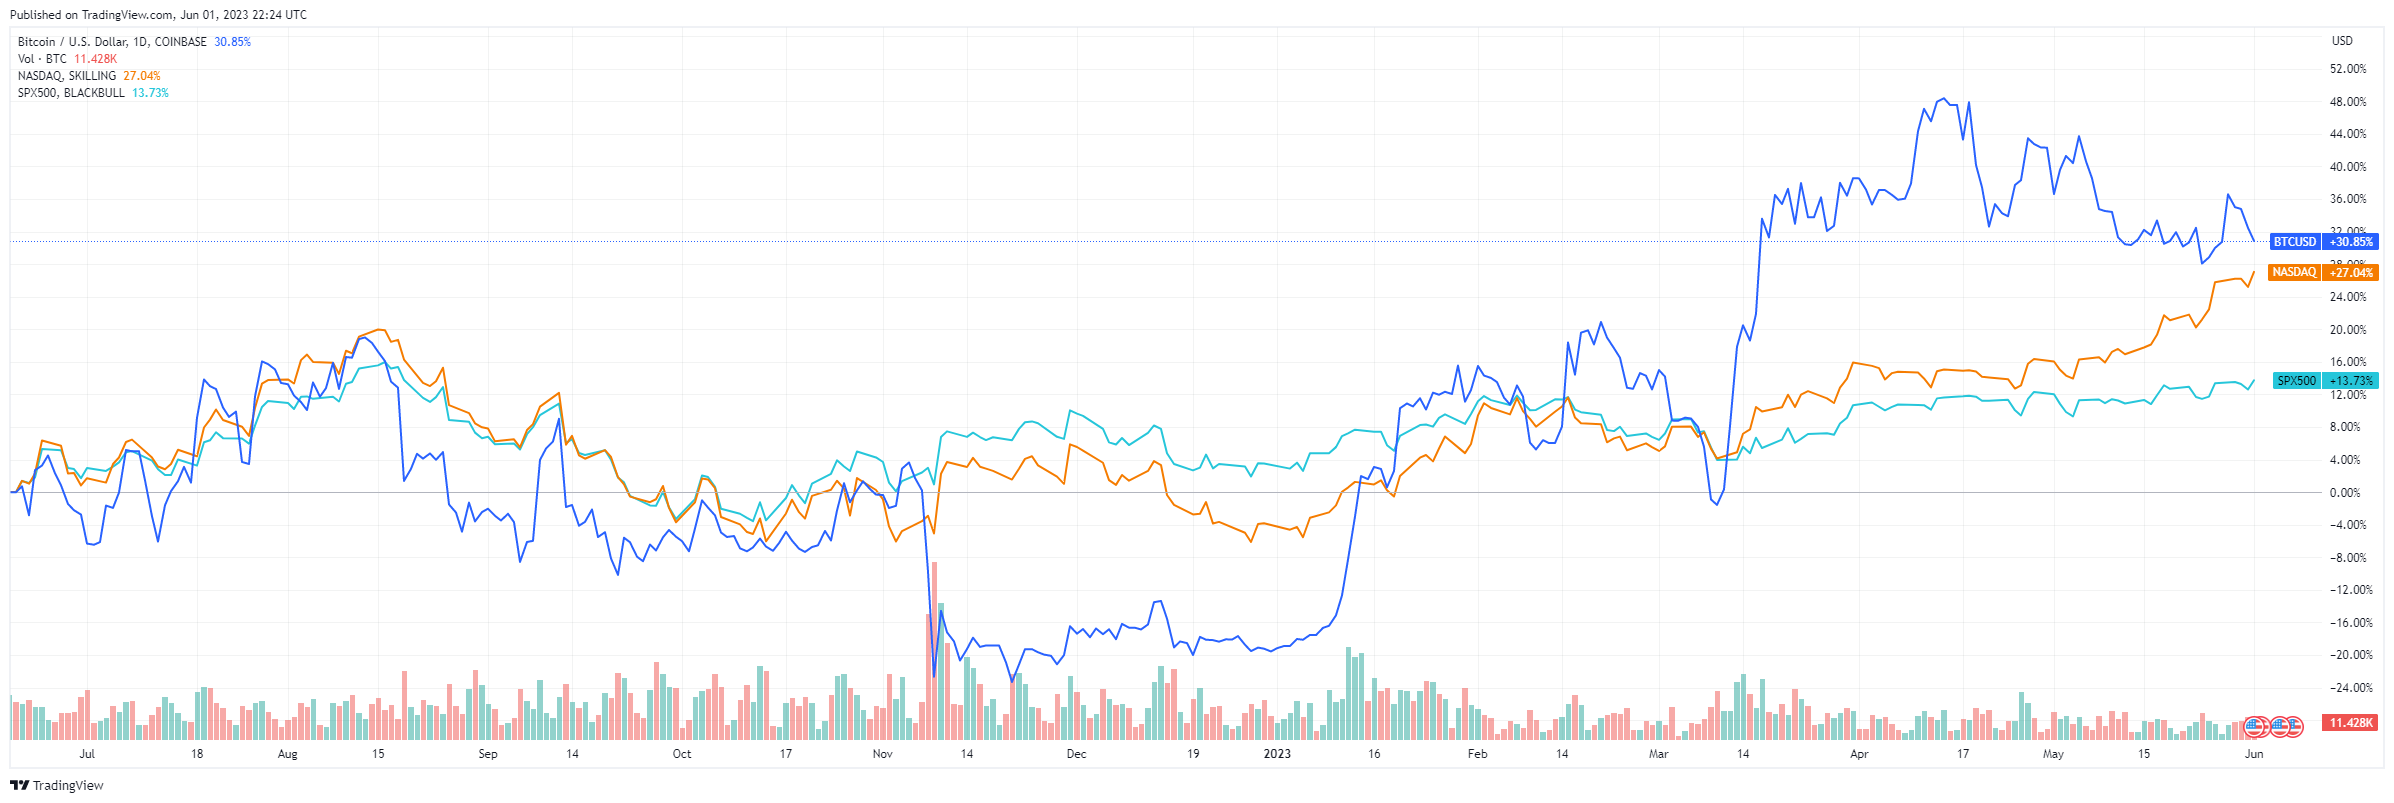 Bitcoin Decouples From Stocks, Moves Closer to Gold